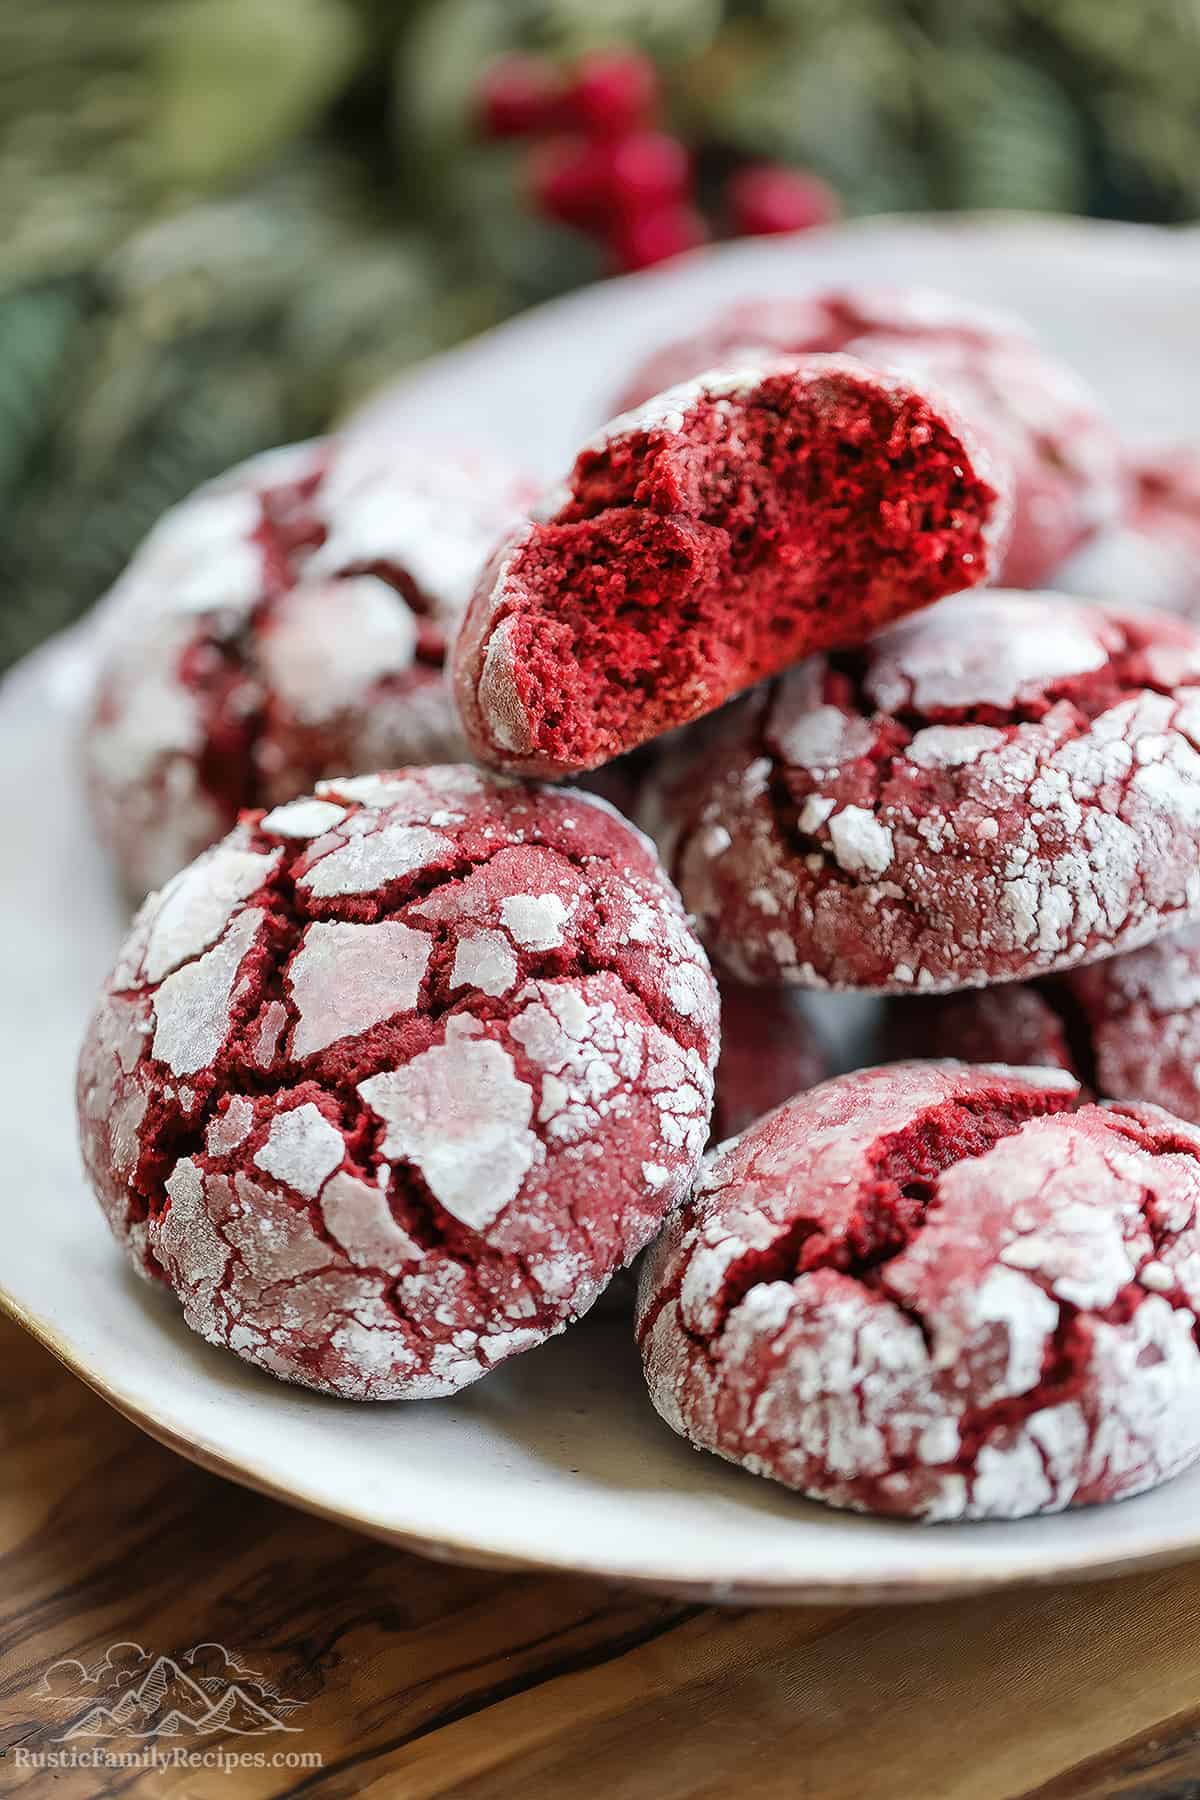 A white plate with a pile of red velvet crinkle cookies, a bite taken out of one.